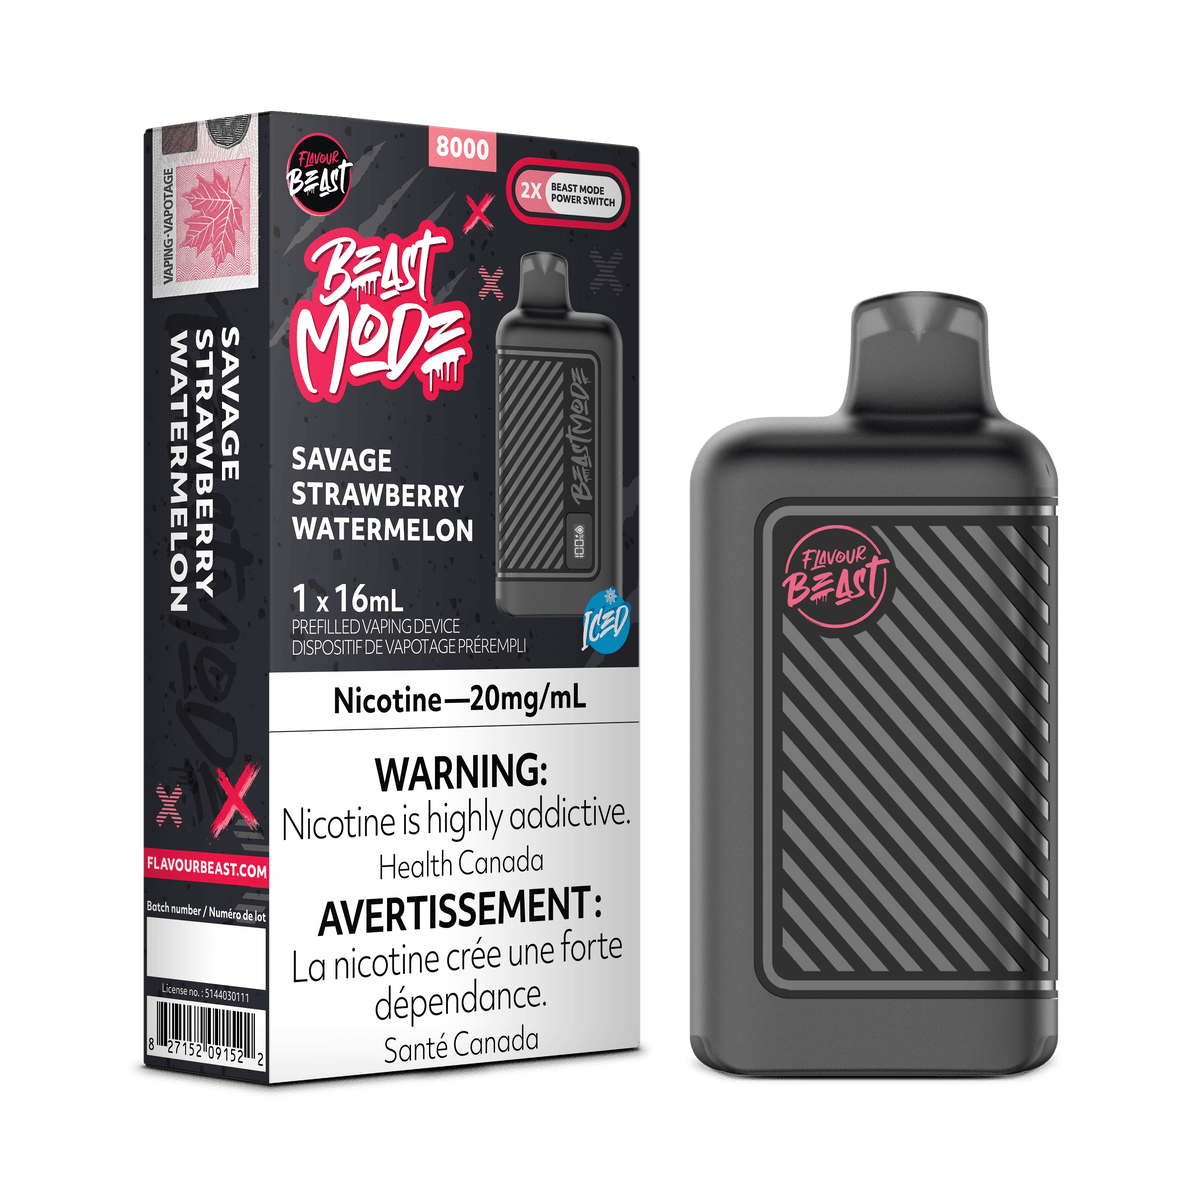 Flavour Beast Beast Mode 8K - Savage Strawberry Watermelon Iced Disposable Vape available on Canada online vape shop